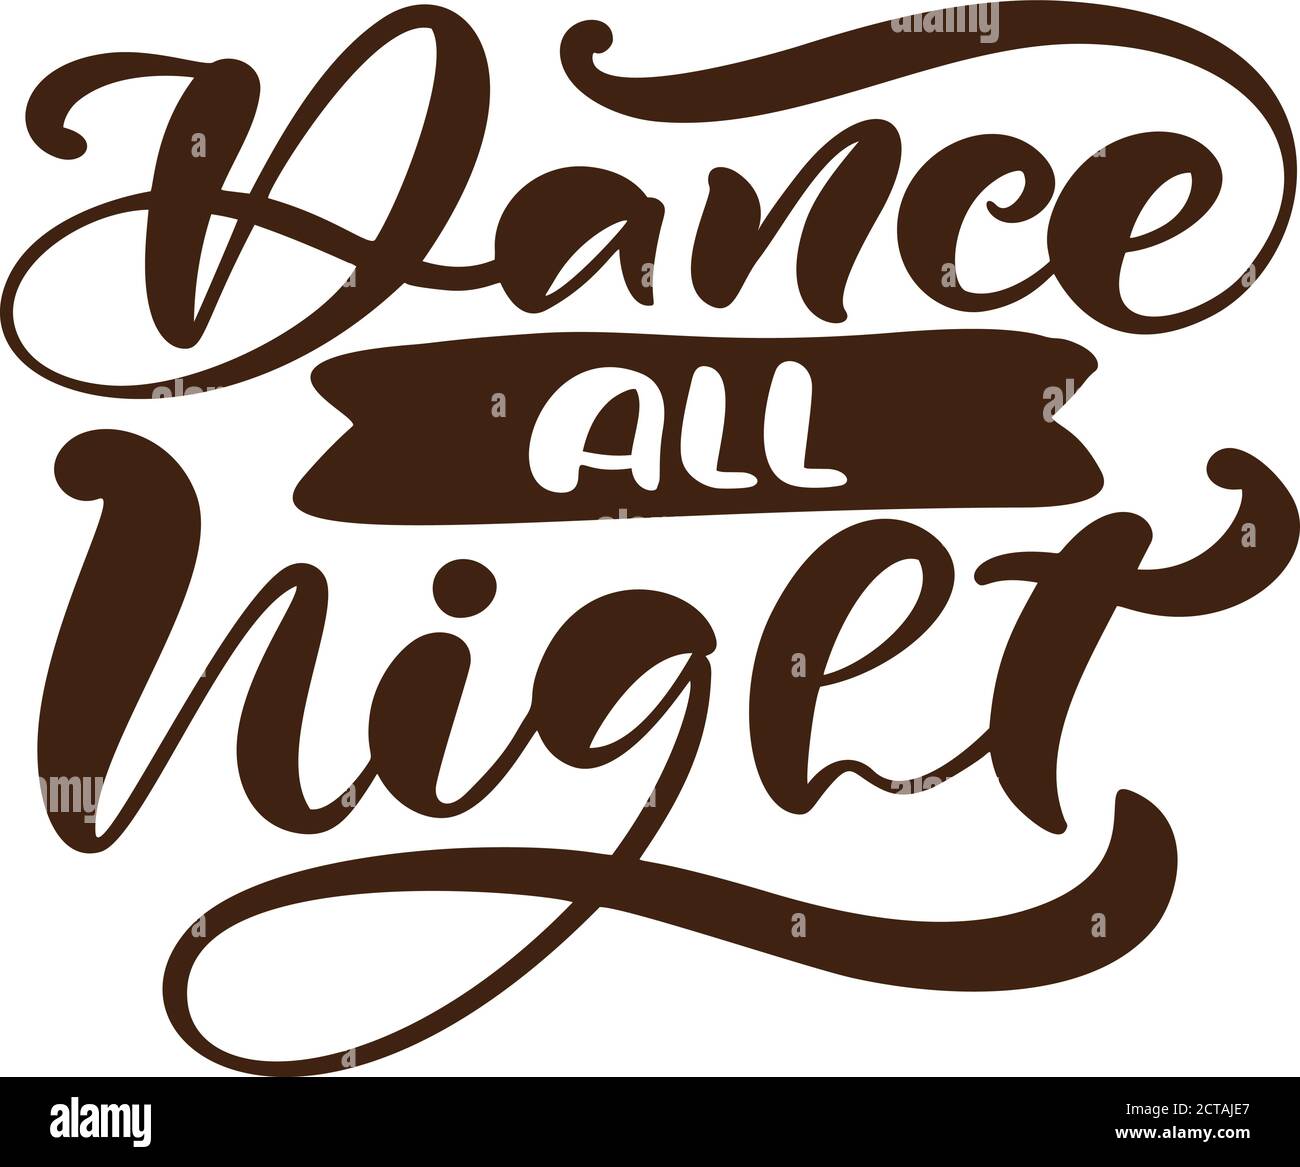 Dance all night hand drawn lettering vector calligraphy text. Ink illustration. Modern motivation slogan design for party banner, poster, card Stock Vector